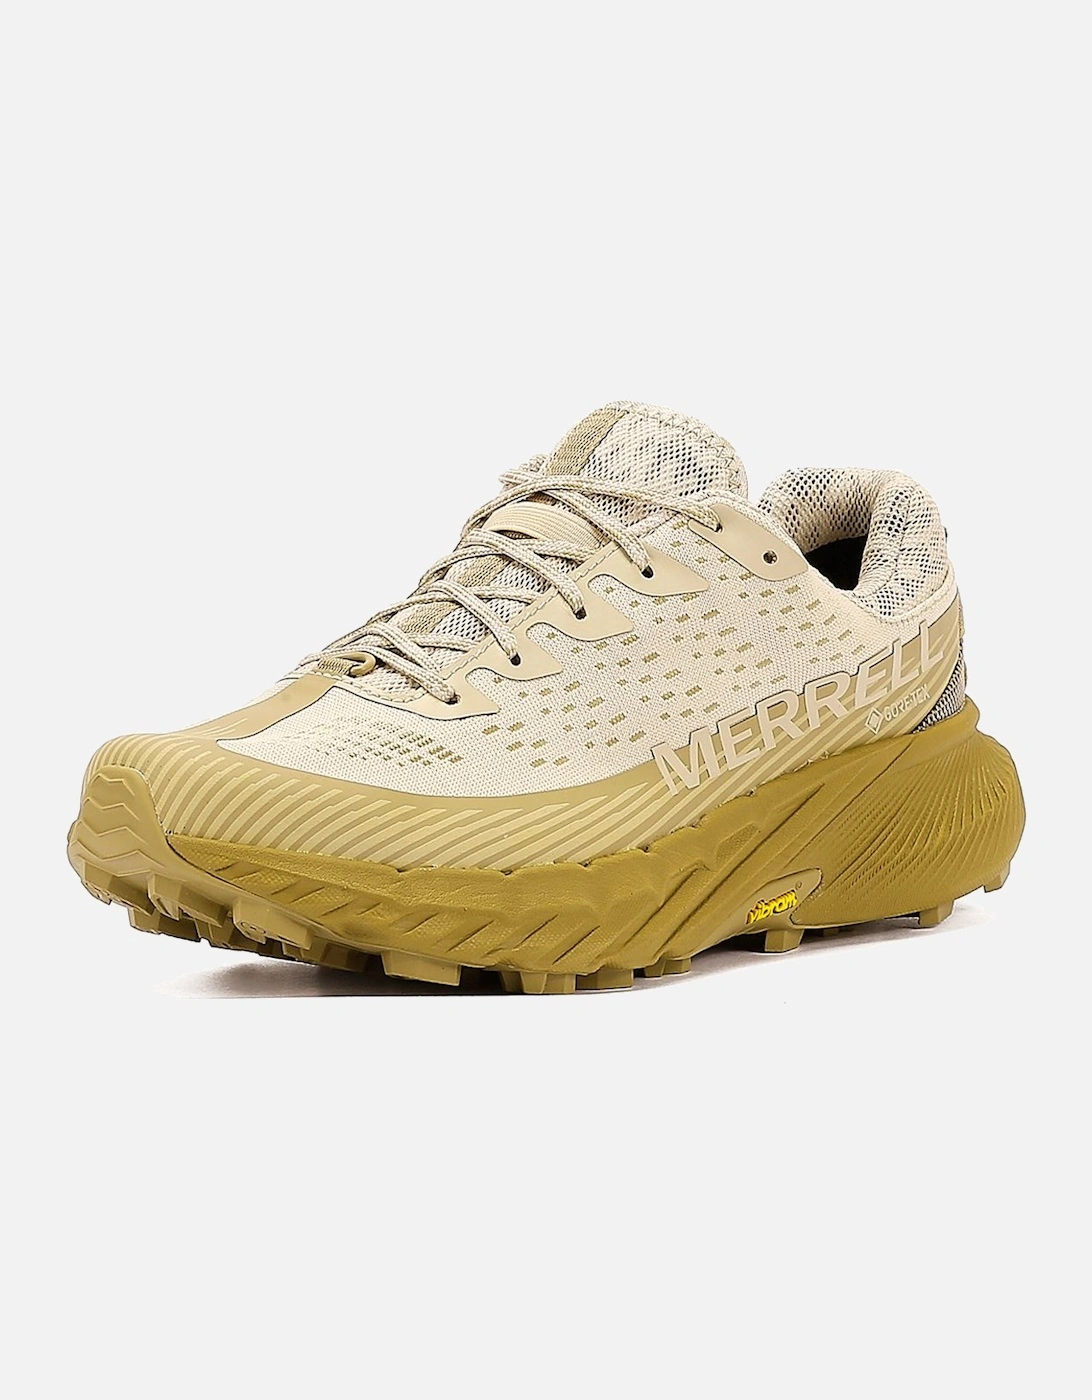 Agility Peak 5 Gore-Tex Men's Oyster/Coyote Trainers